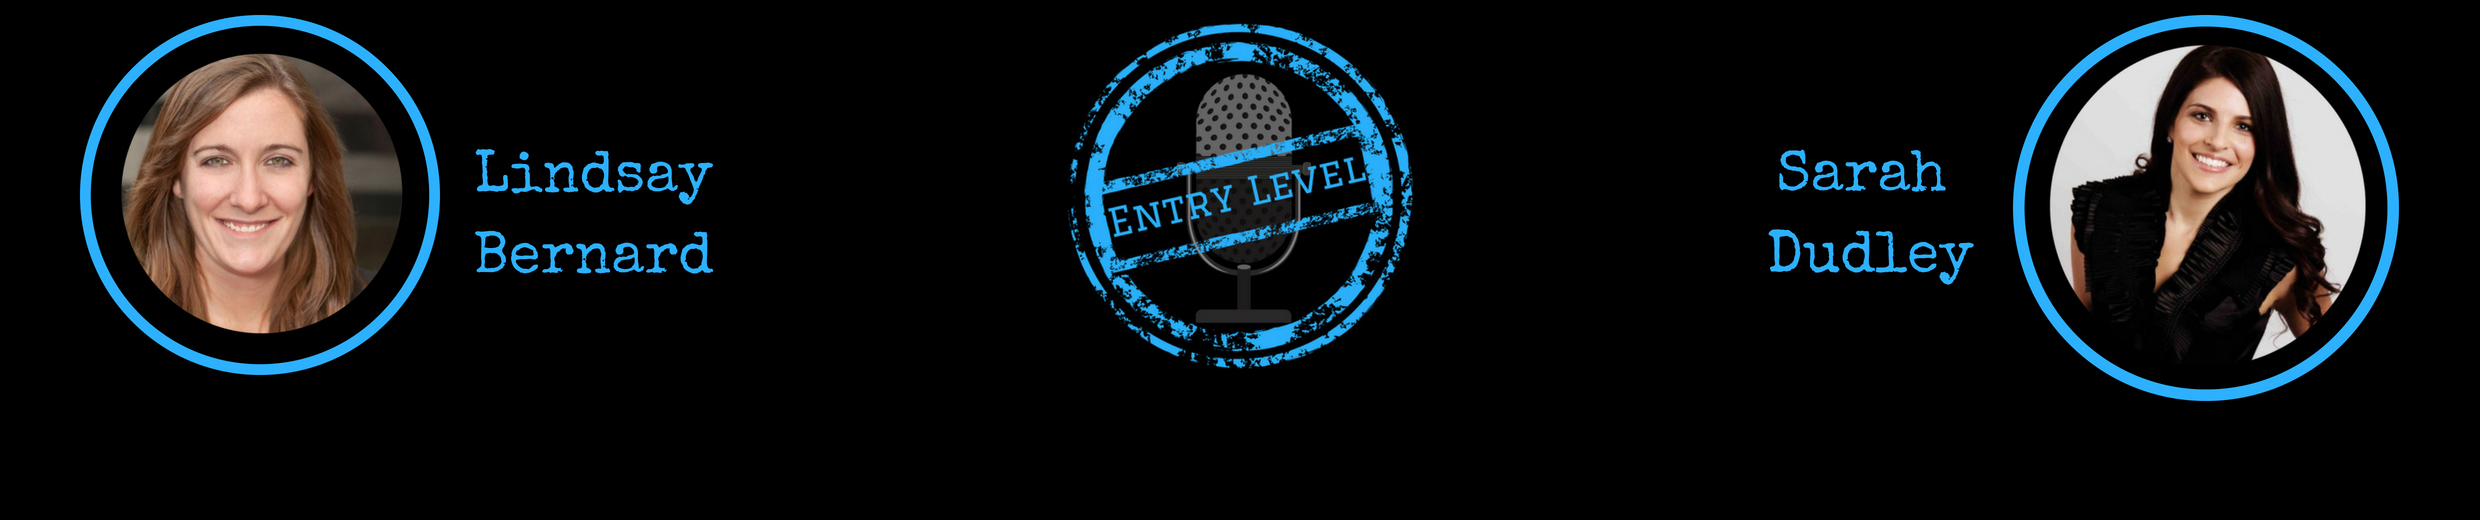 Entry Level Podcast